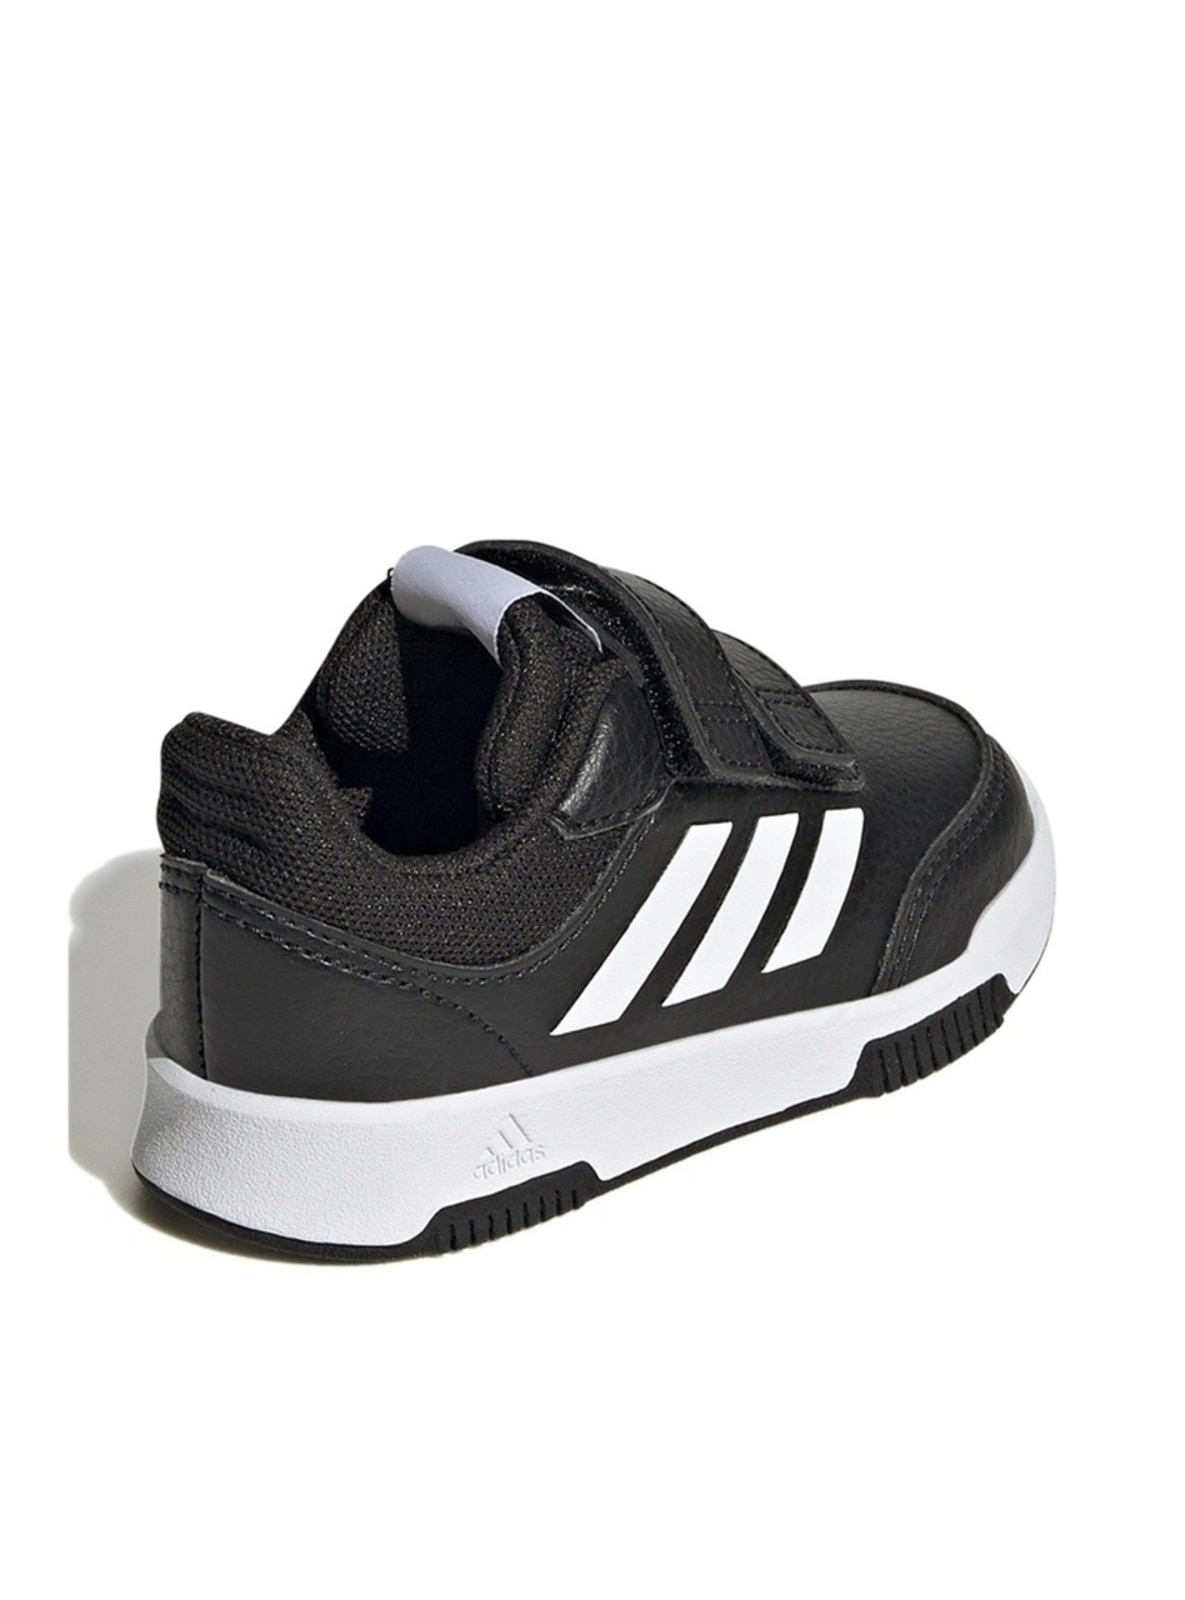 upside down Initiative Effectively Black - Kids Trainers